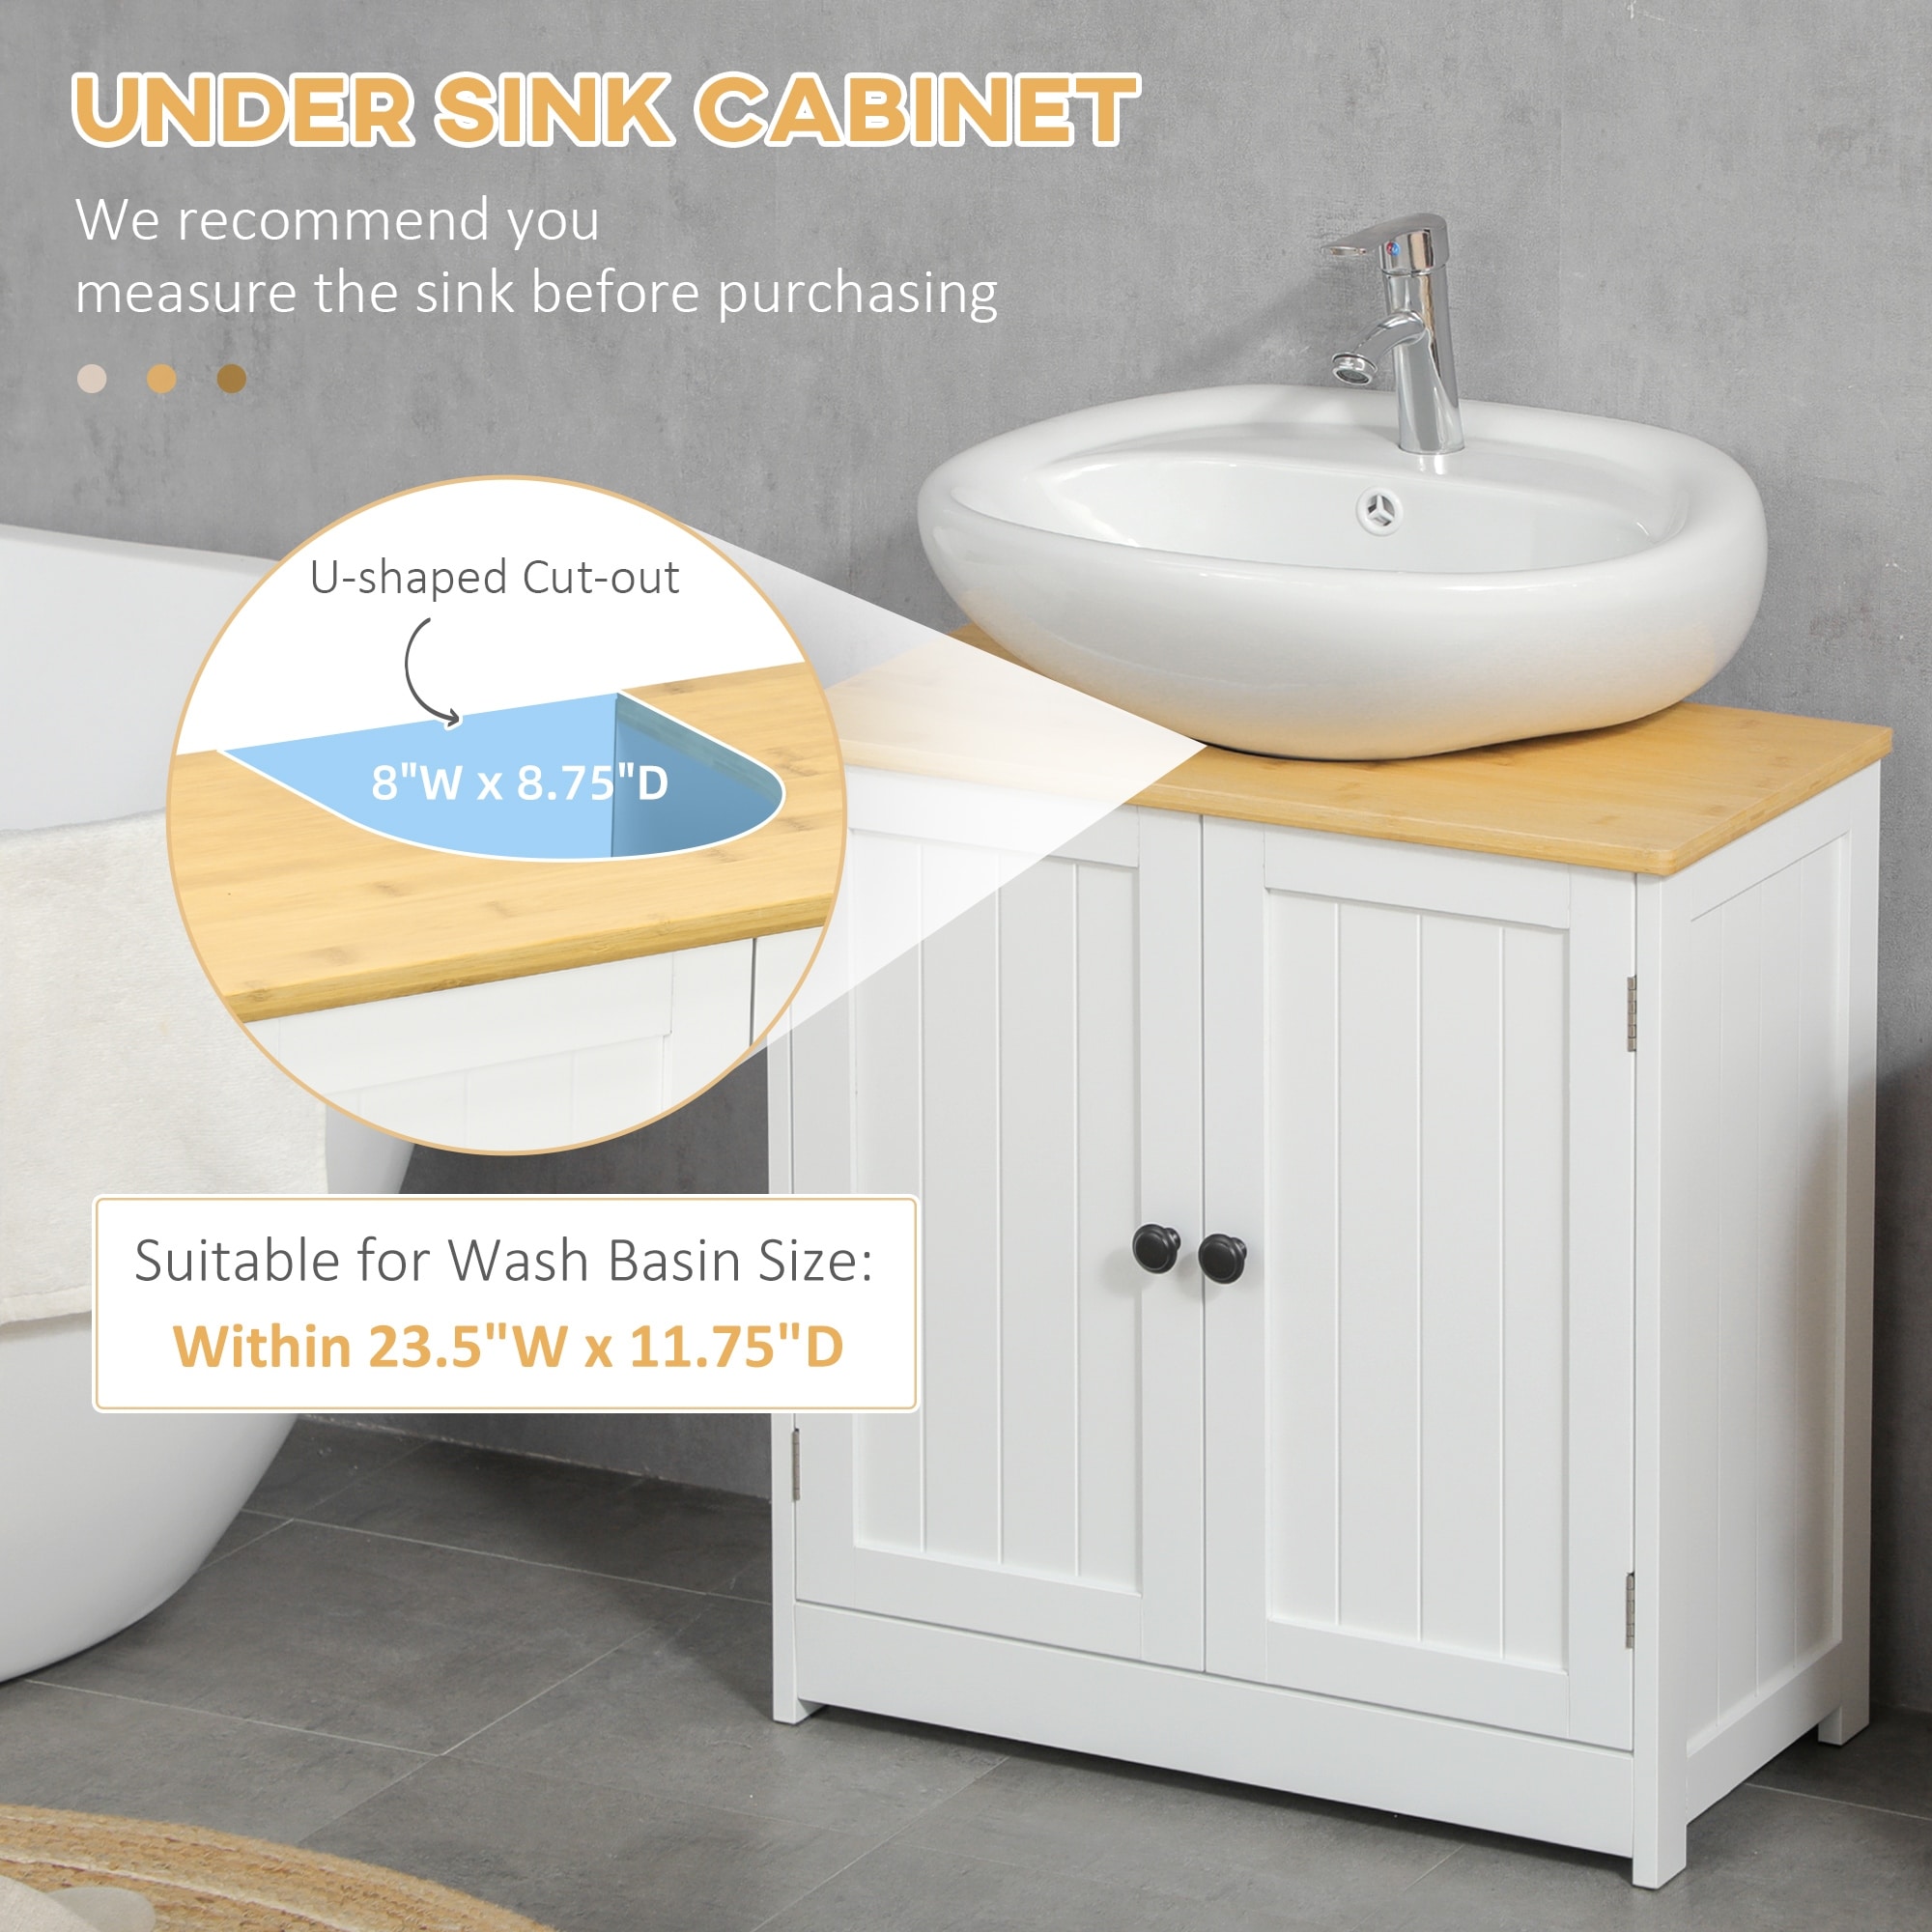 https://ak1.ostkcdn.com/images/products/is/images/direct/e77368f0eb28d6d9785fa4b1067addc7e874f1ac/kleankin-Modern-Bathroom-Sink-Cabinet%2C-Pedestal-Sink-Storage-Cabinet-with-Double-Doors-and-Adjustable-Shelf%2C-Bathroom-Vanity.jpg